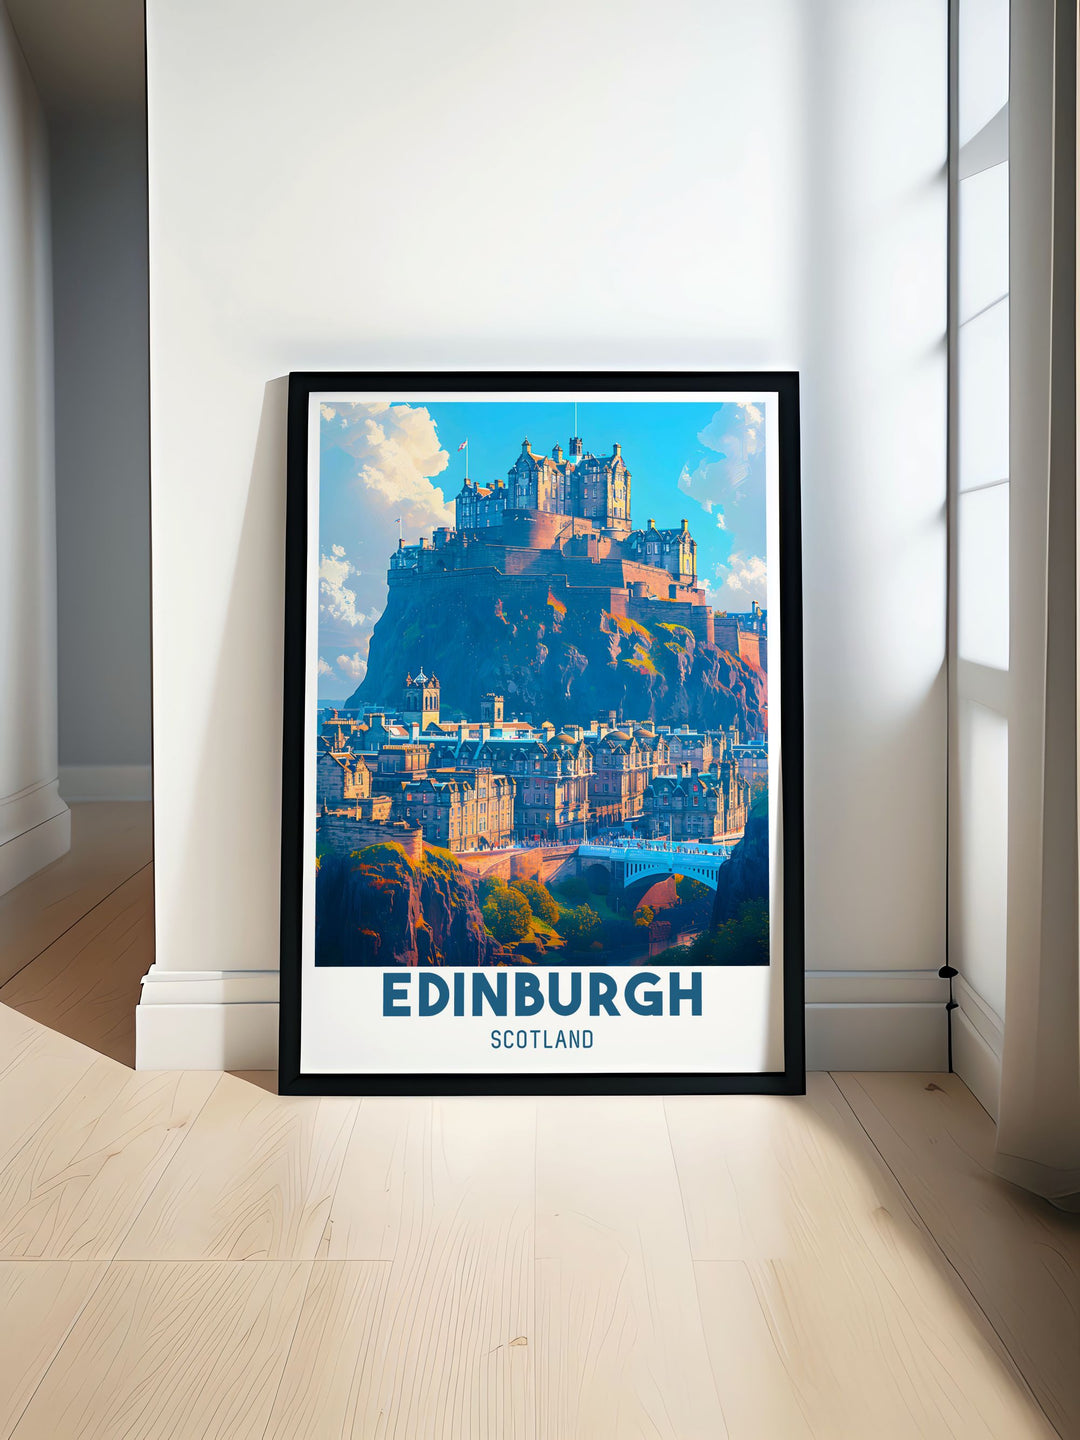 A detailed print of Edinburgh Castle, showcasing the historic fortress perched atop Castle Rock with panoramic views of the city and surrounding landscapes.